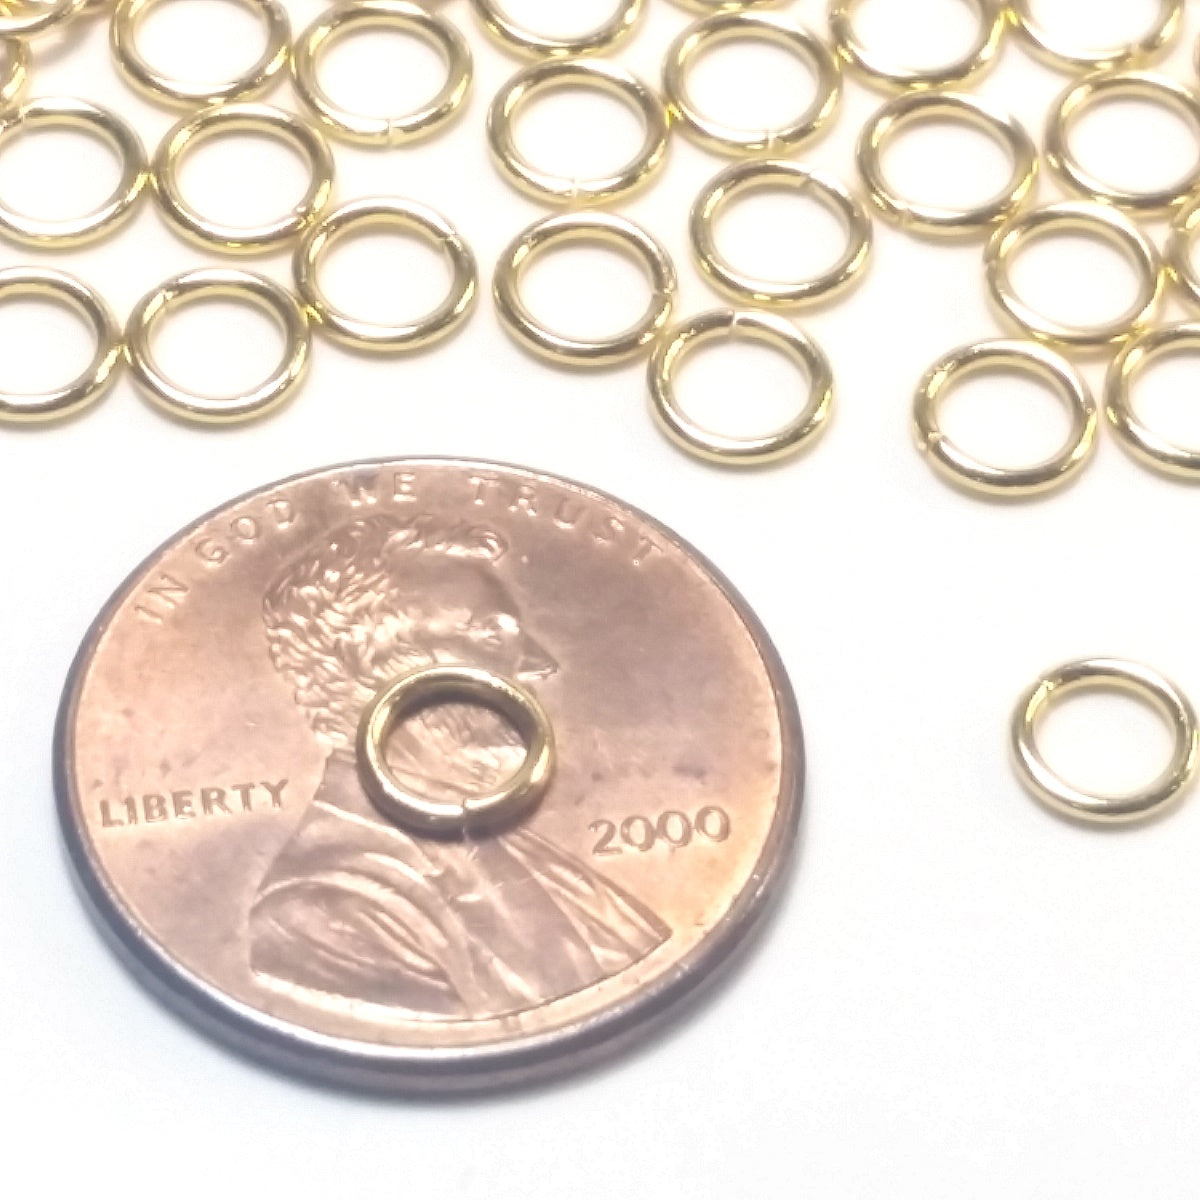 Gold Filled Jump rings 1x3mm - wire thickness 1mm (18 Gauge) x inside  diameter 3mm